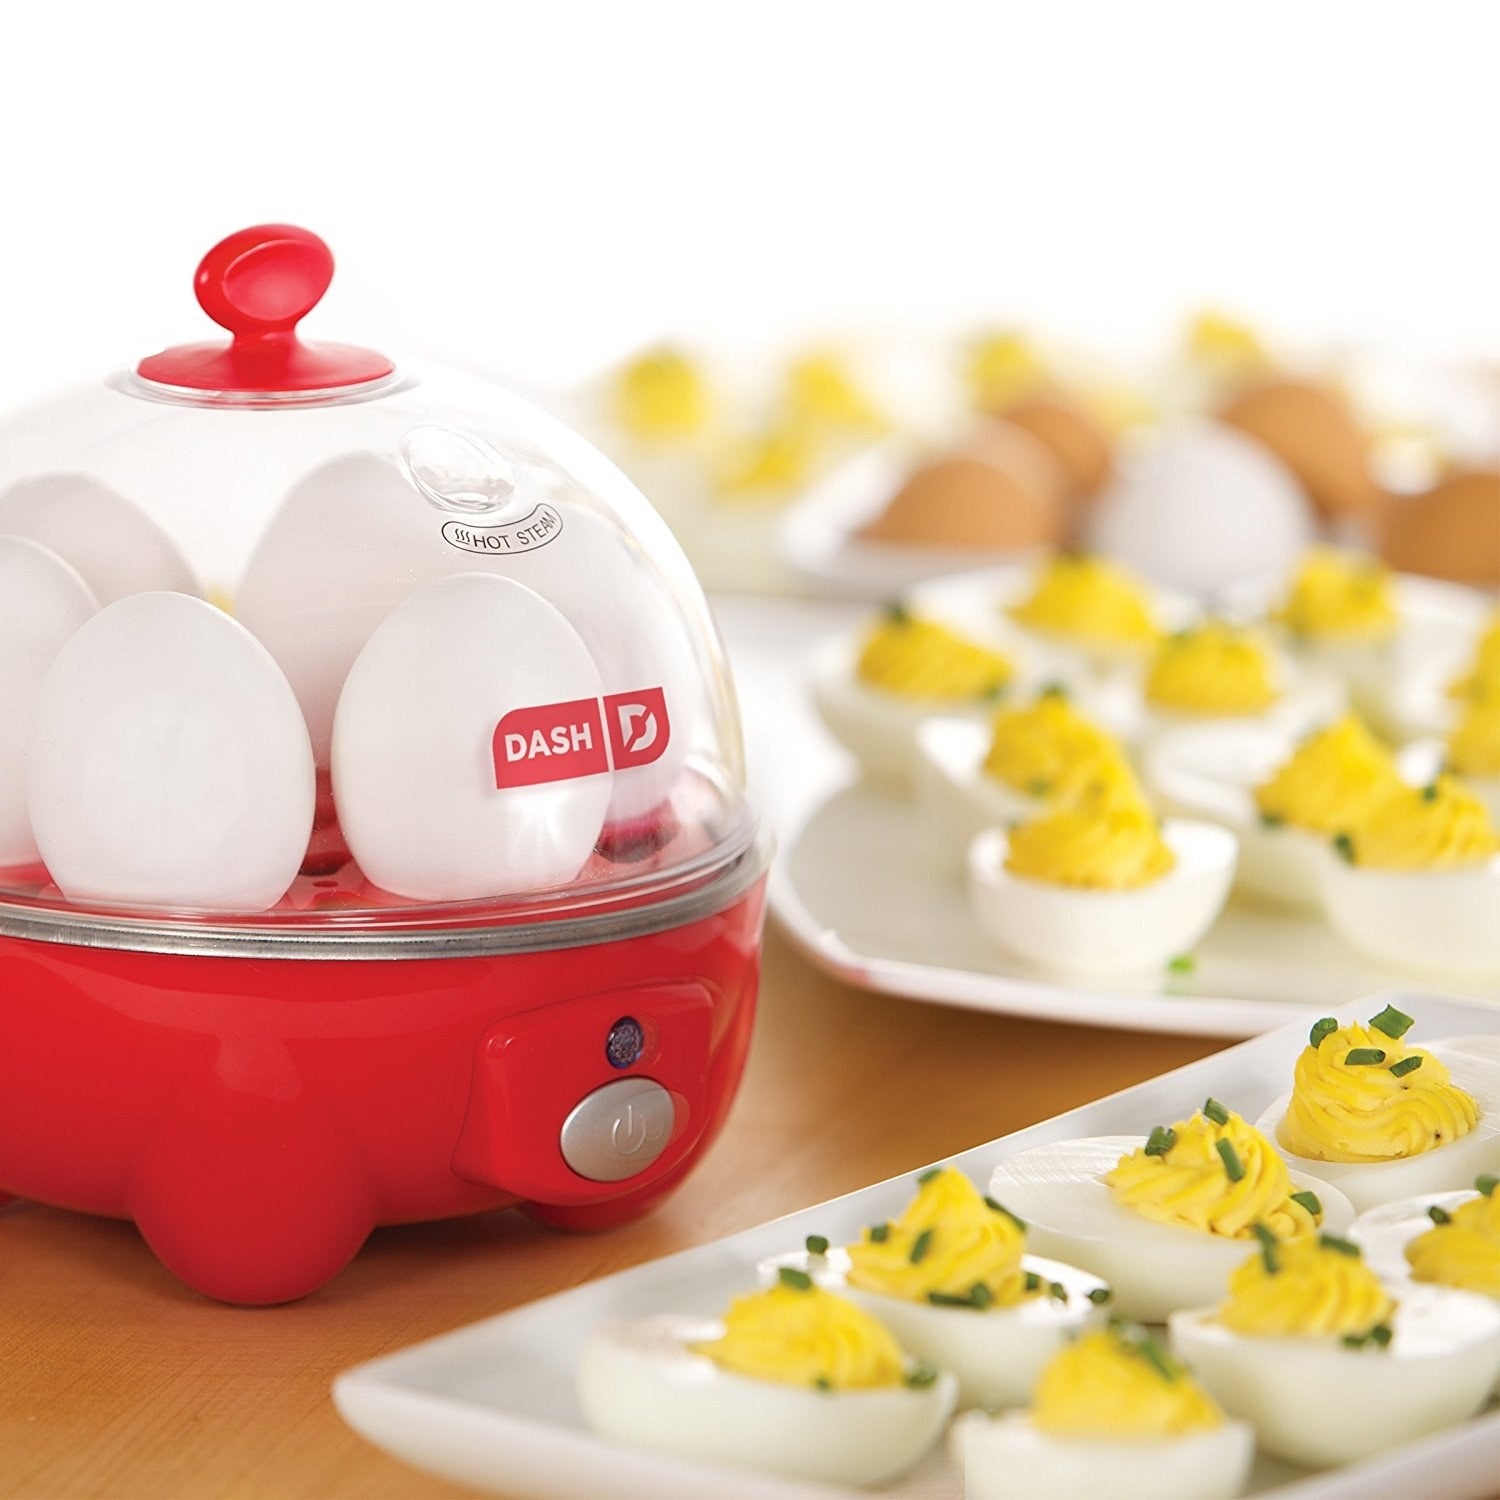 If You Are Passionate About Perfectly Cooked Eggs, You Need This